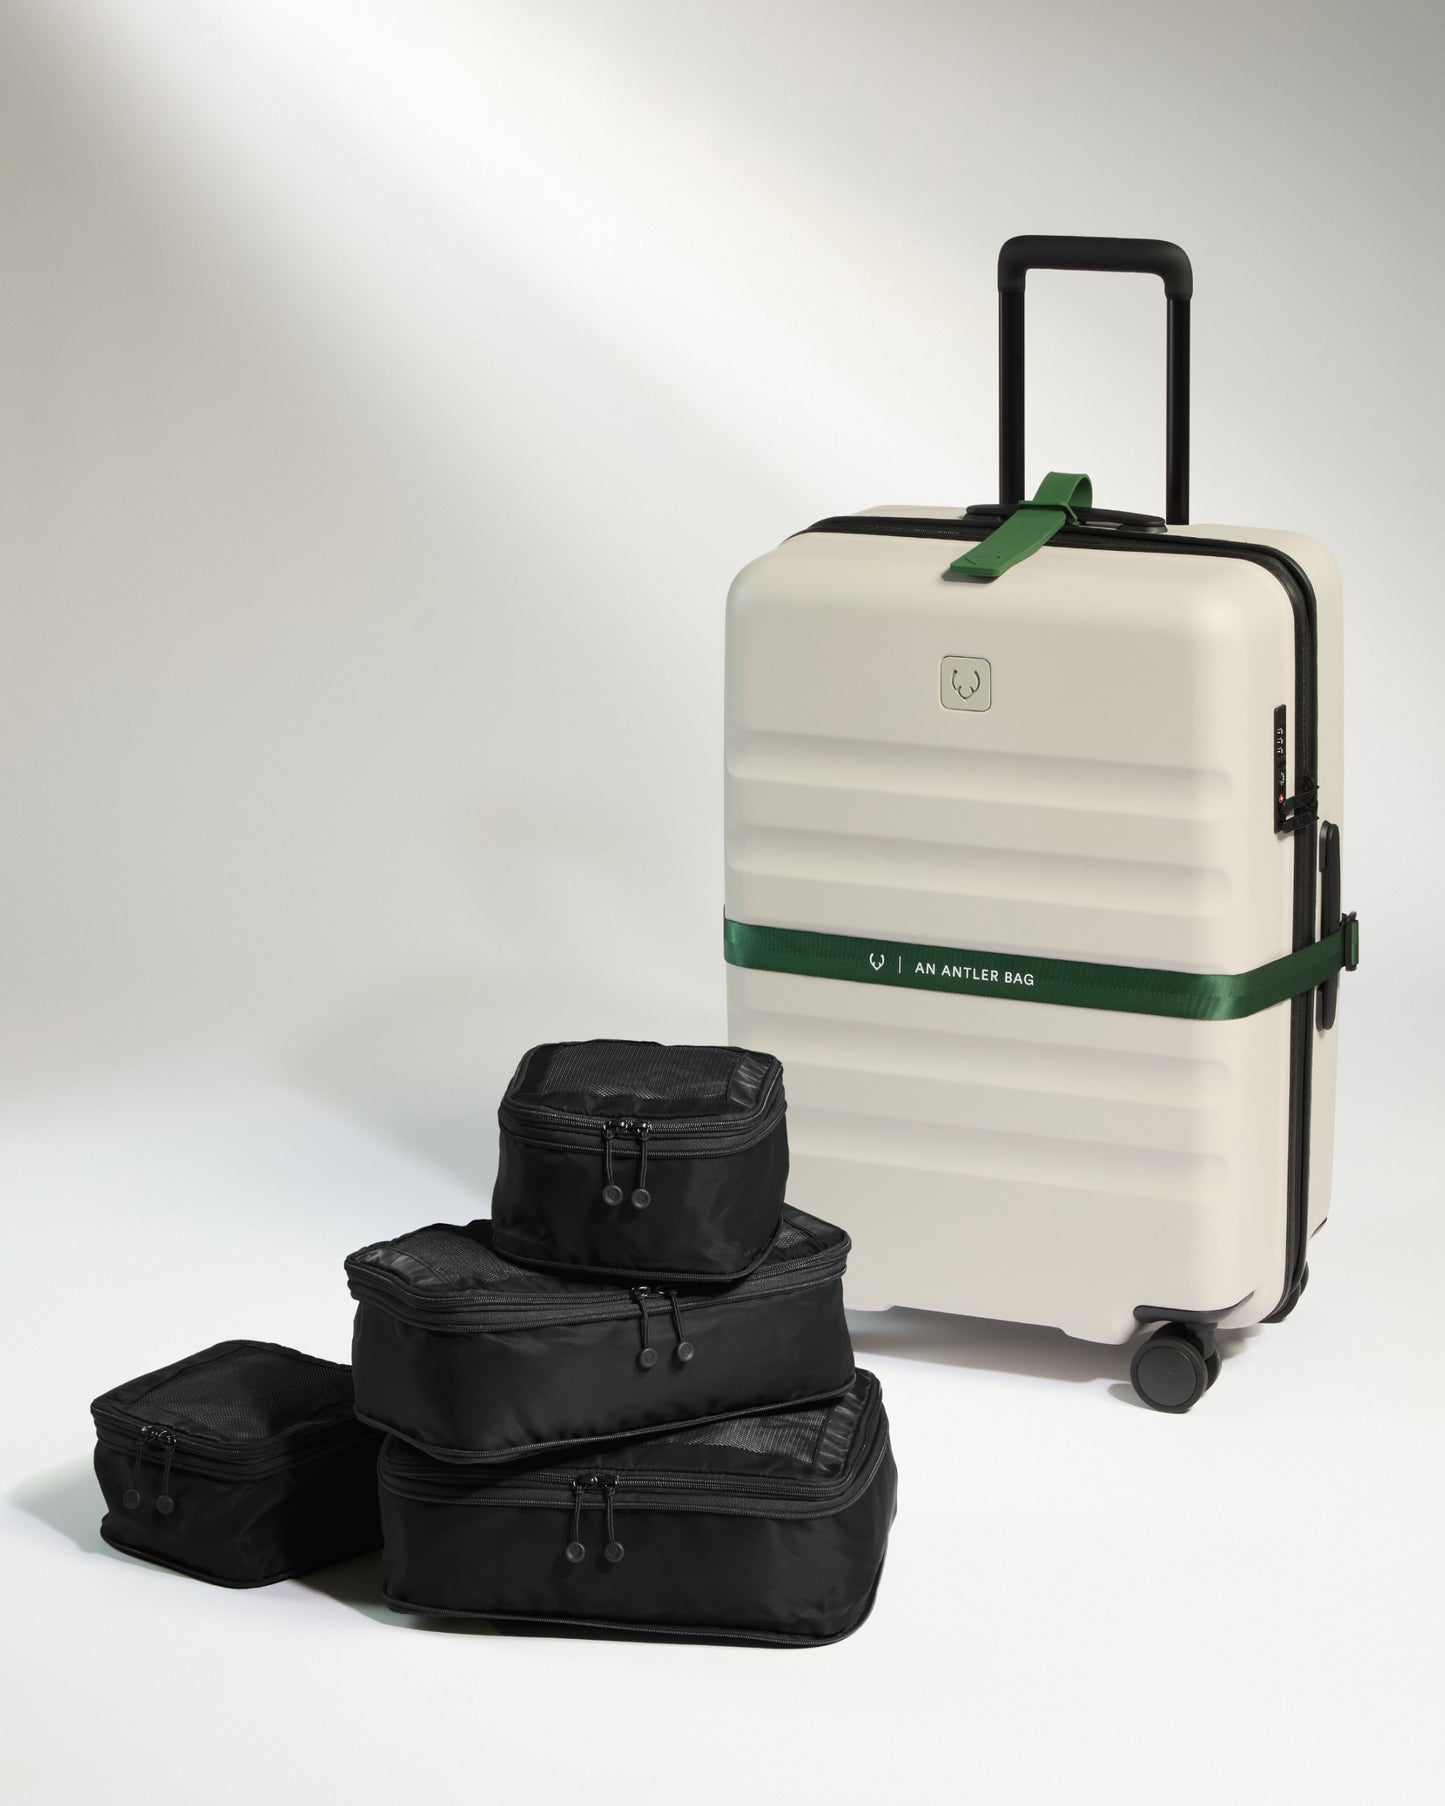 Chelsea 4 packing cubes in black